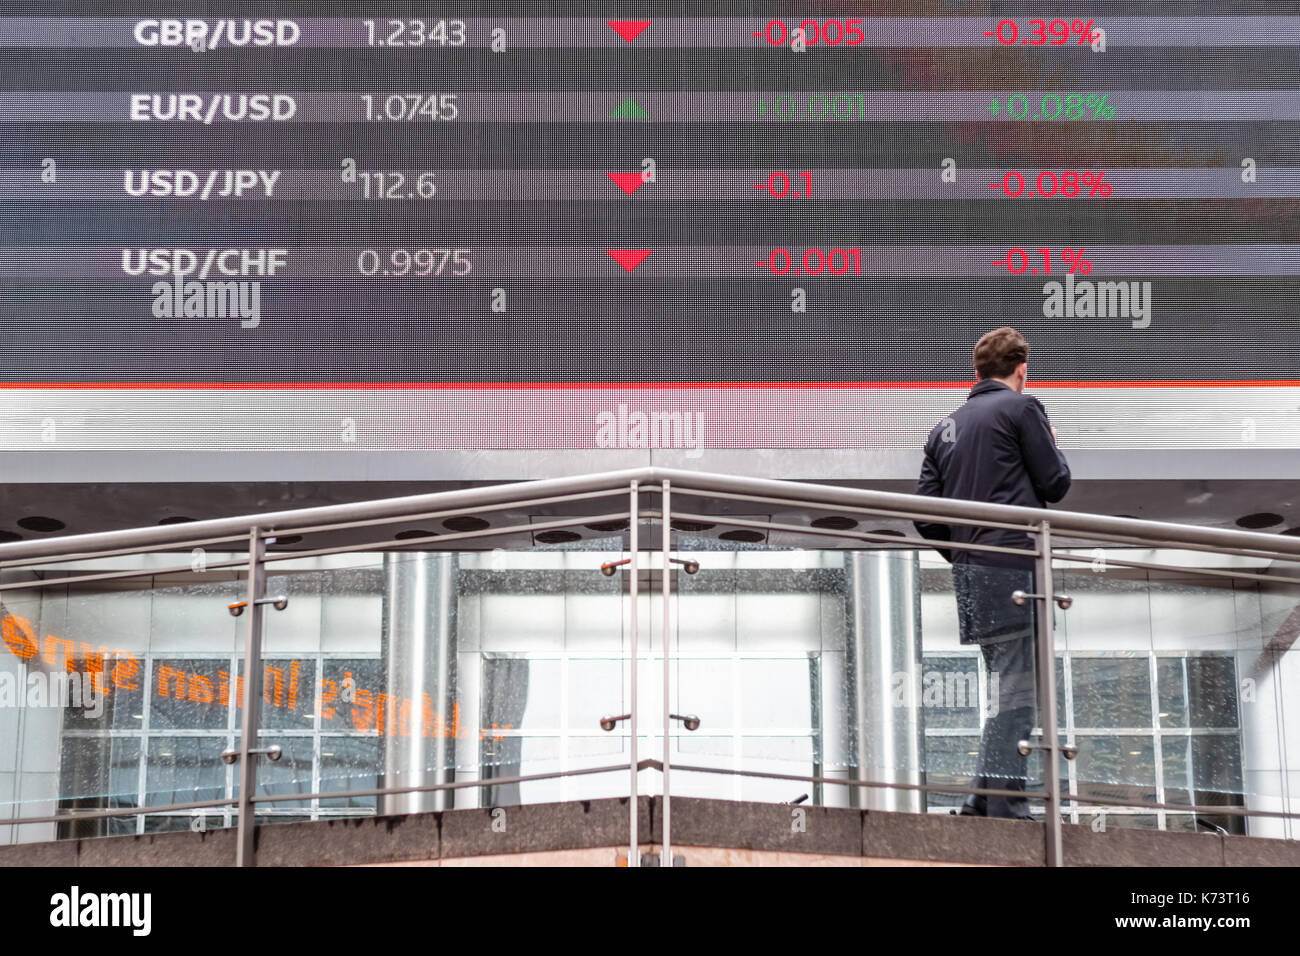 London, UK - September 15, 2017 - Stock market data displayed on a outdoor screen in Canary Wharf with a man standing in front of it Stock Photo